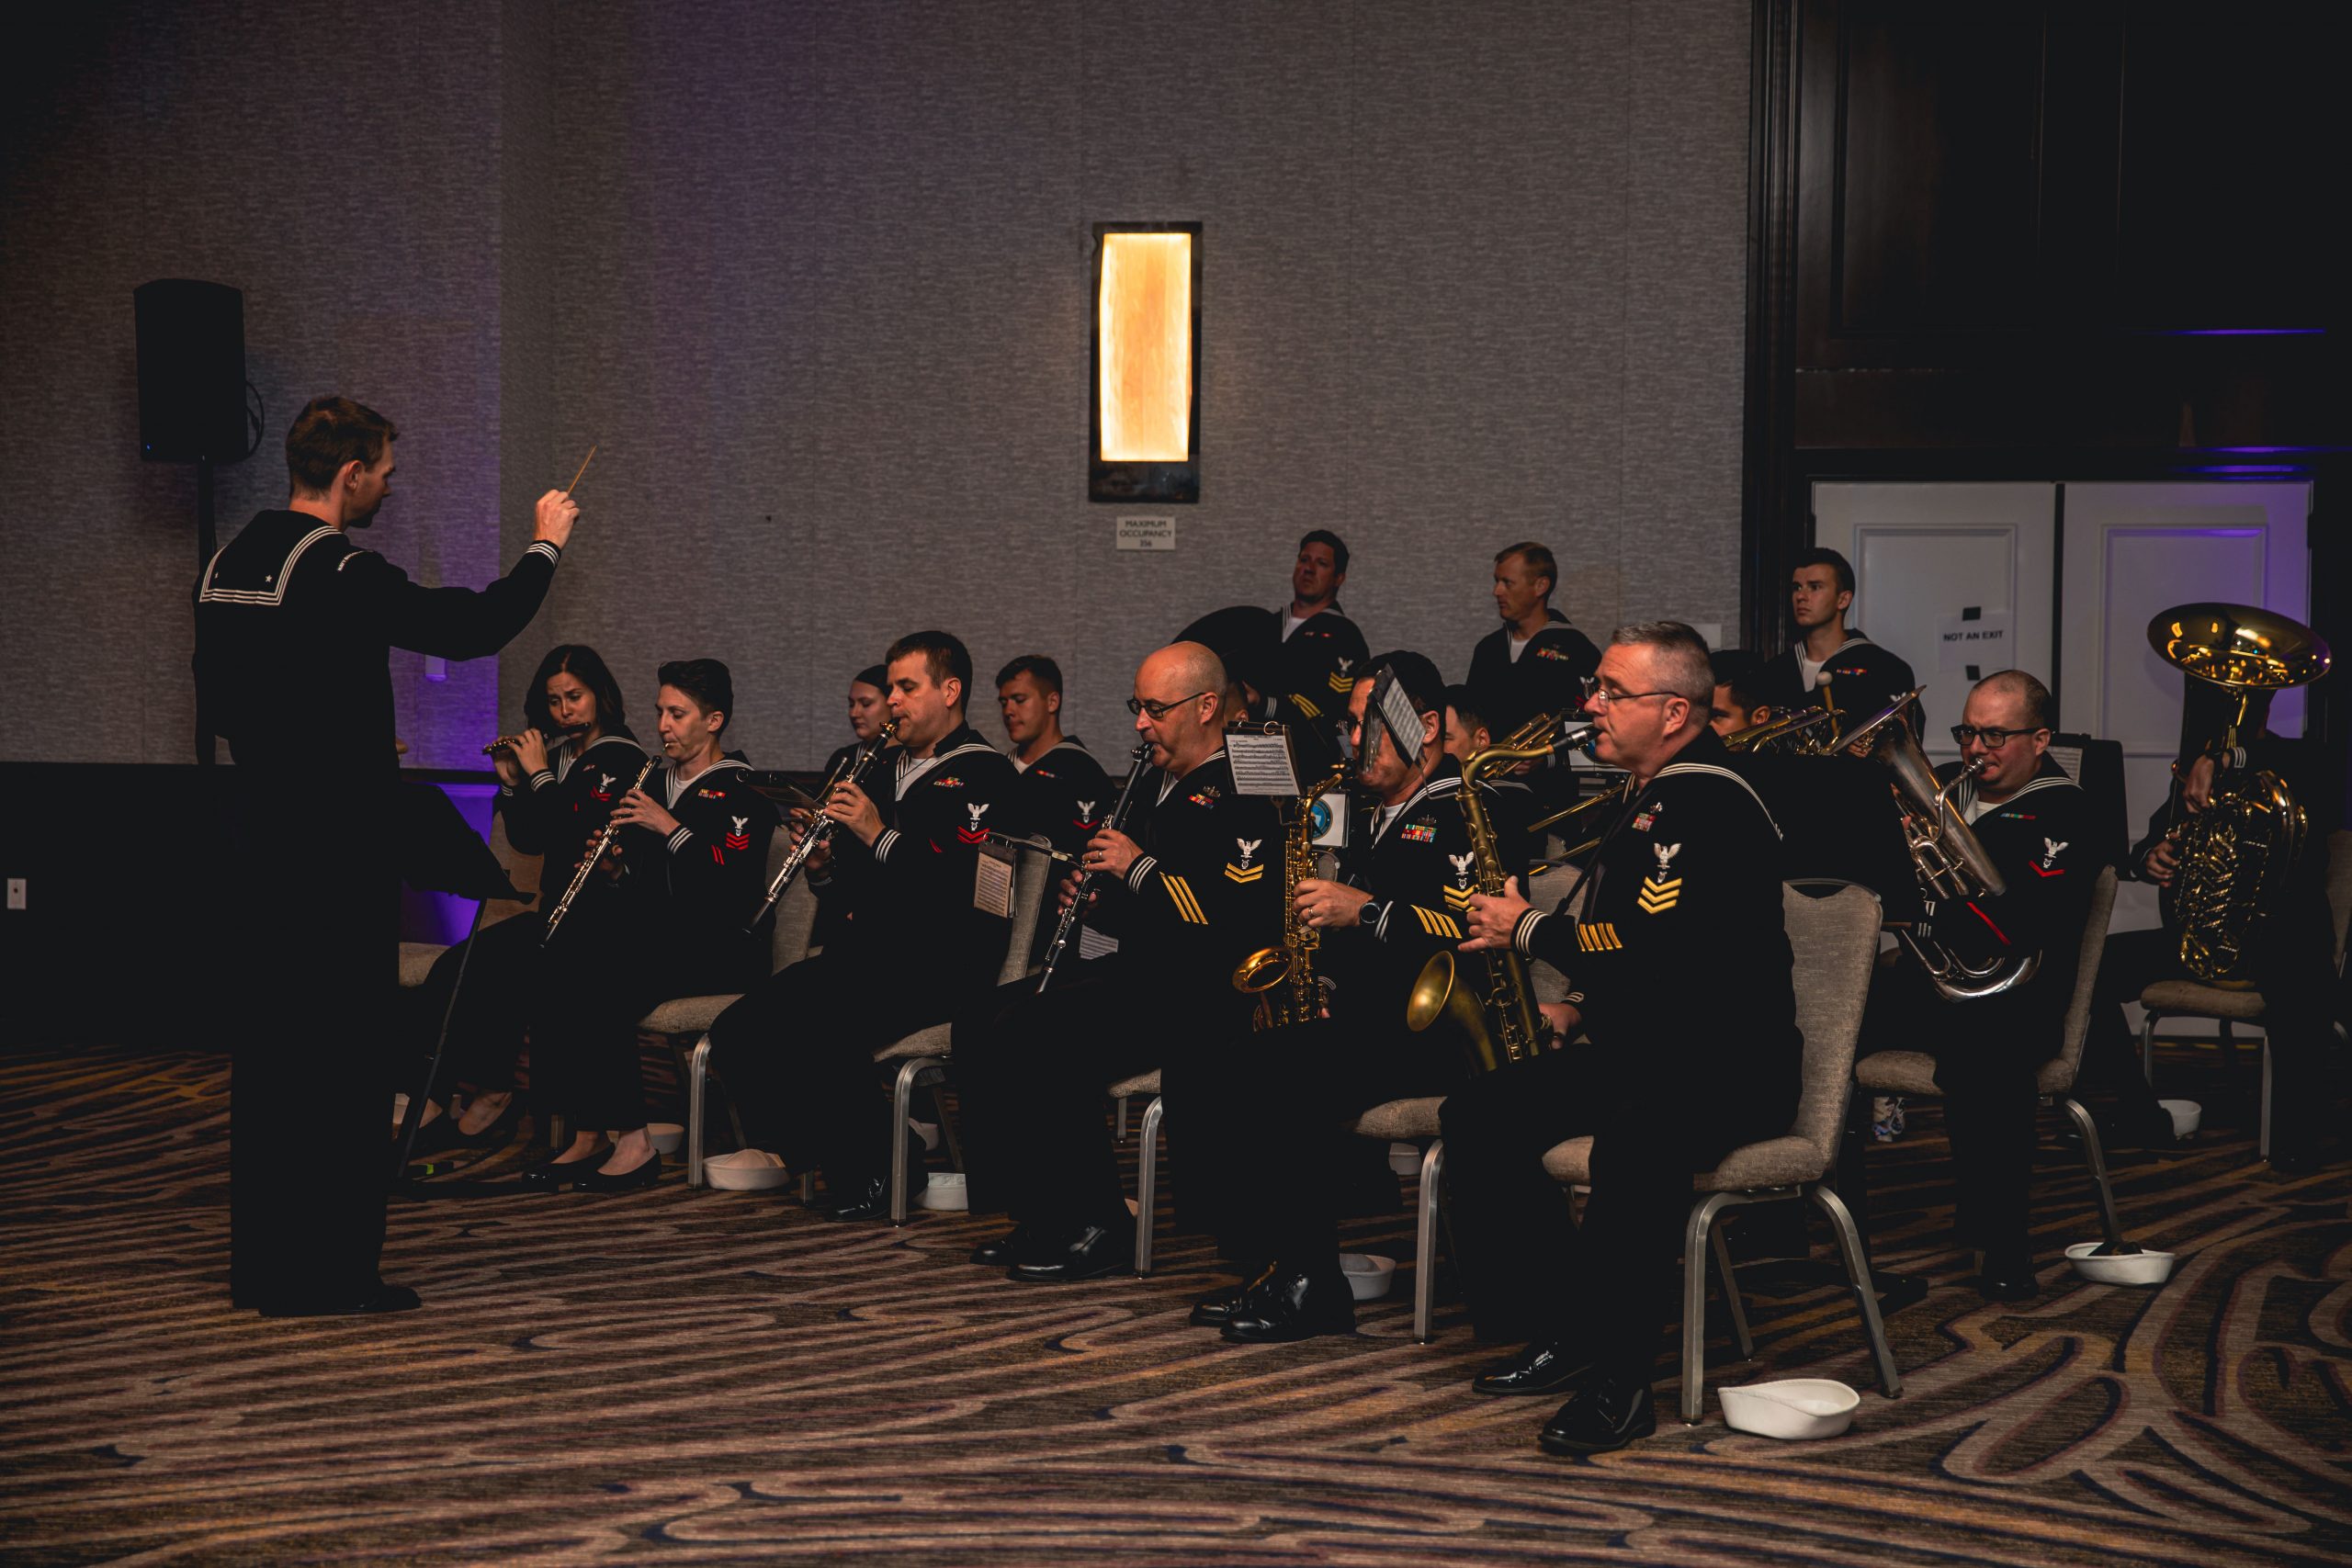 U.S. Navy Musicians perform at the Navy Ball